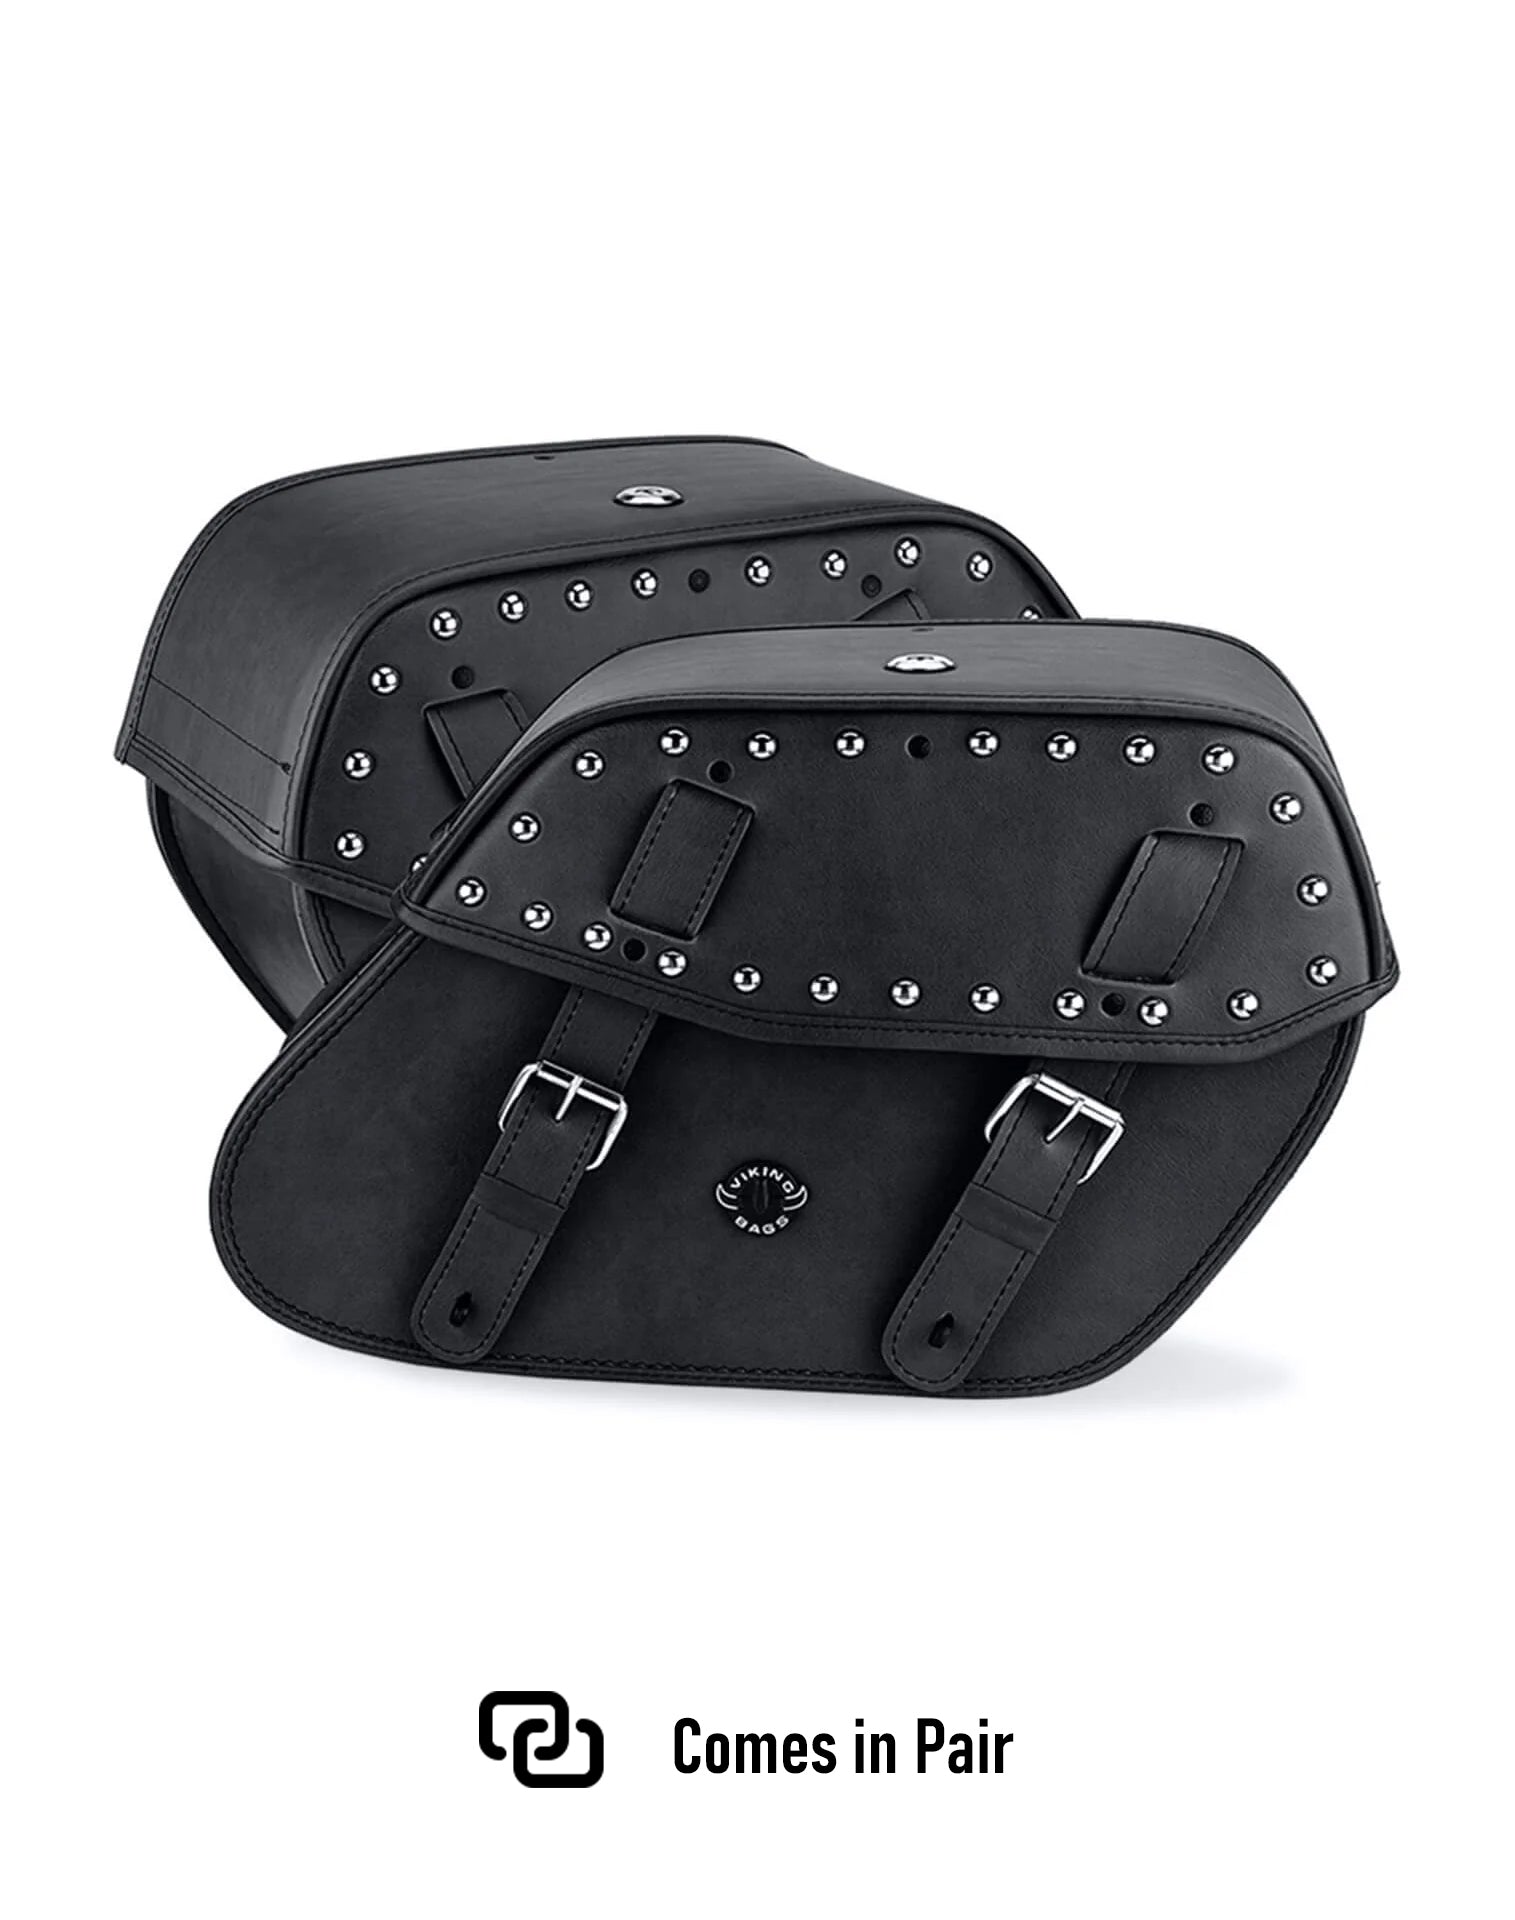 Viking Odin Large Yamaha Stratoliner Xv 1900 Studded Leather Motorcycle Saddlebags Weather Resistant Bags Comes in Pair